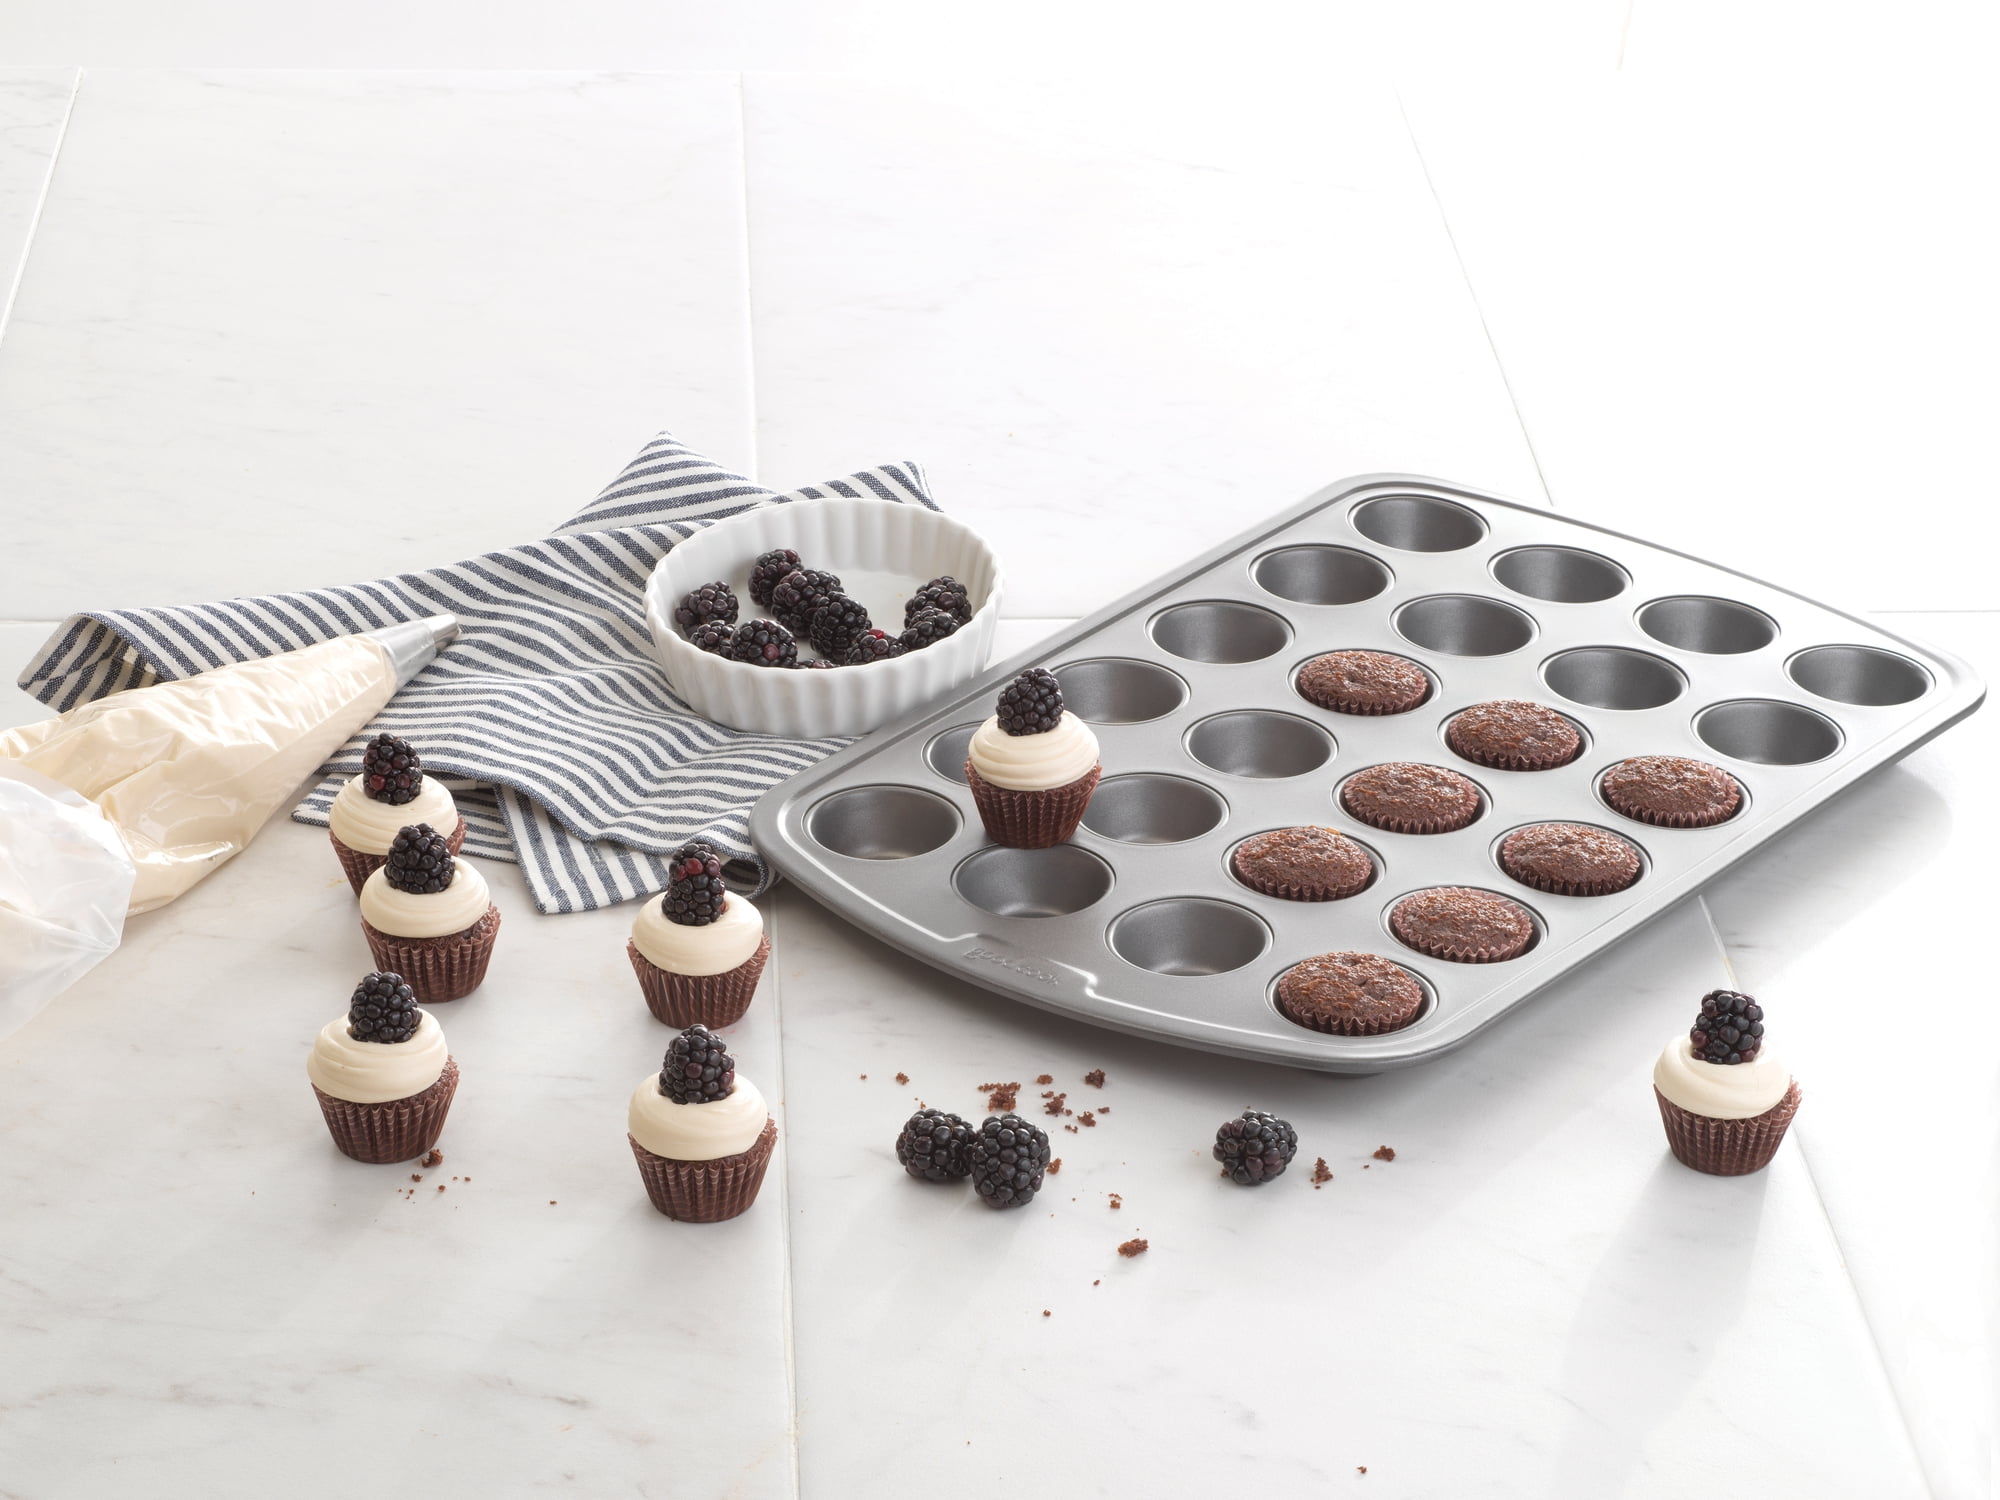 Ecolution Bakeins 24 Mini Muffin and Cupcake Pan